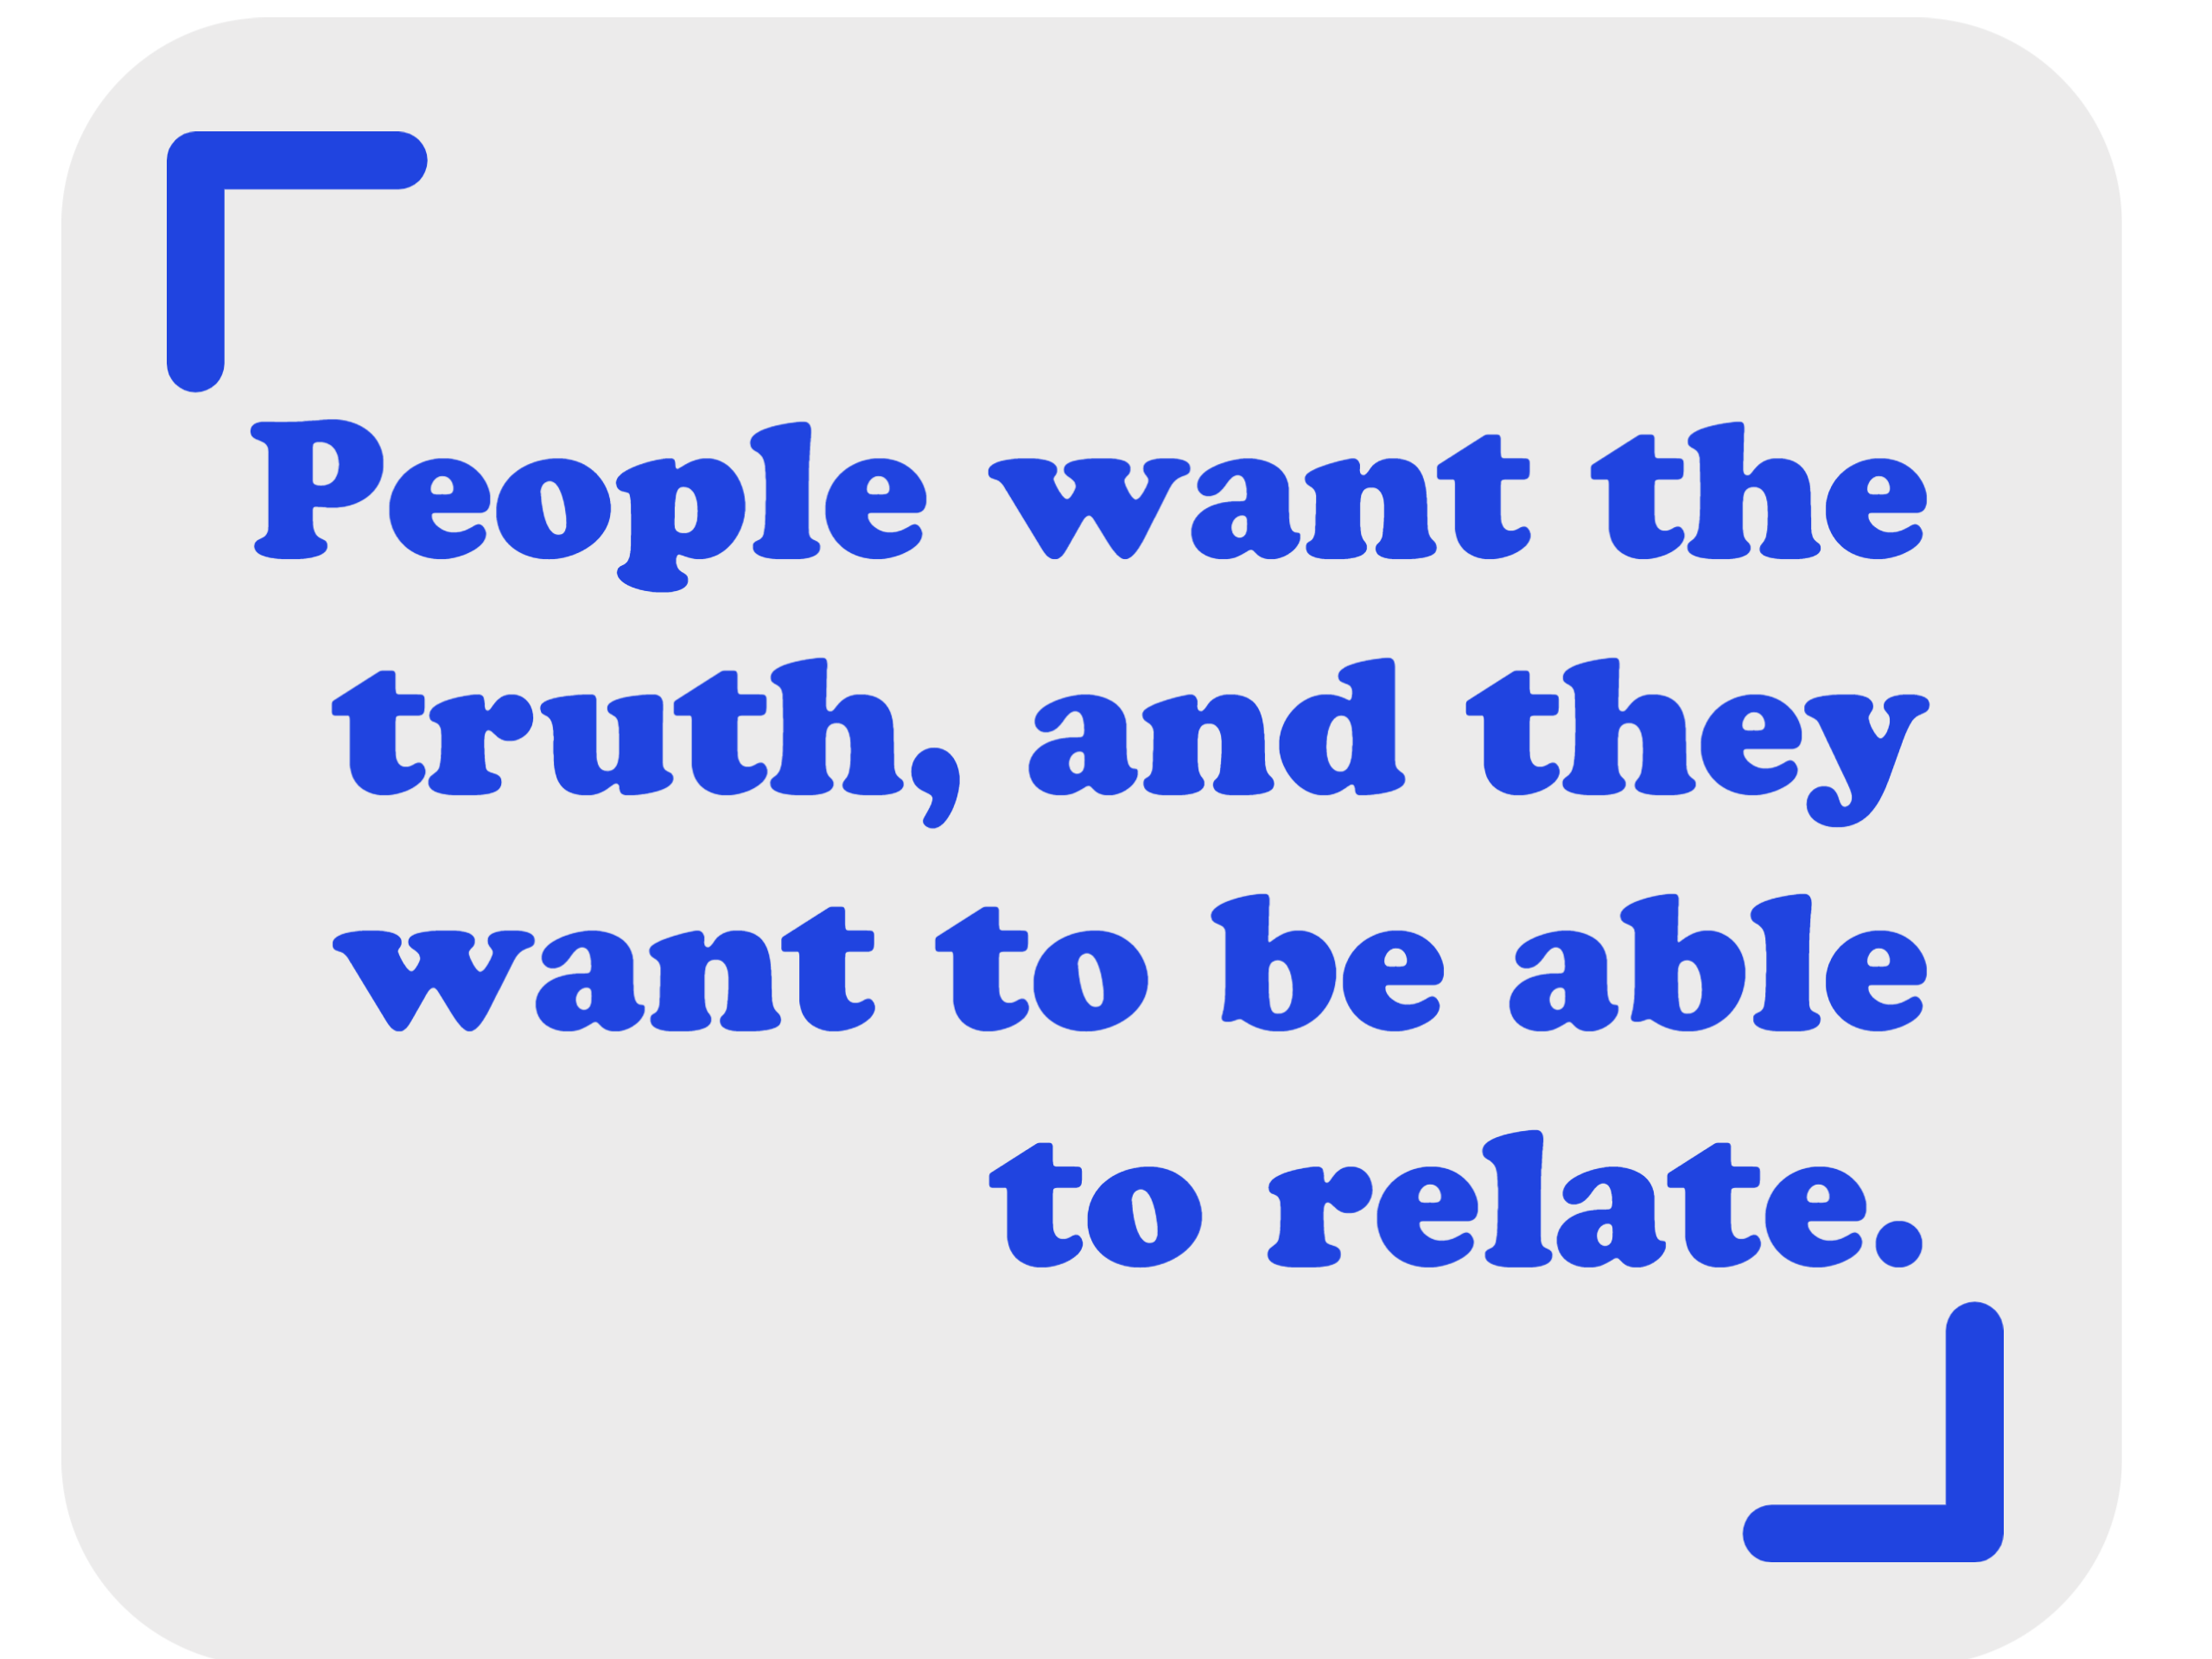 People want the truth, and they want to be able to releate.